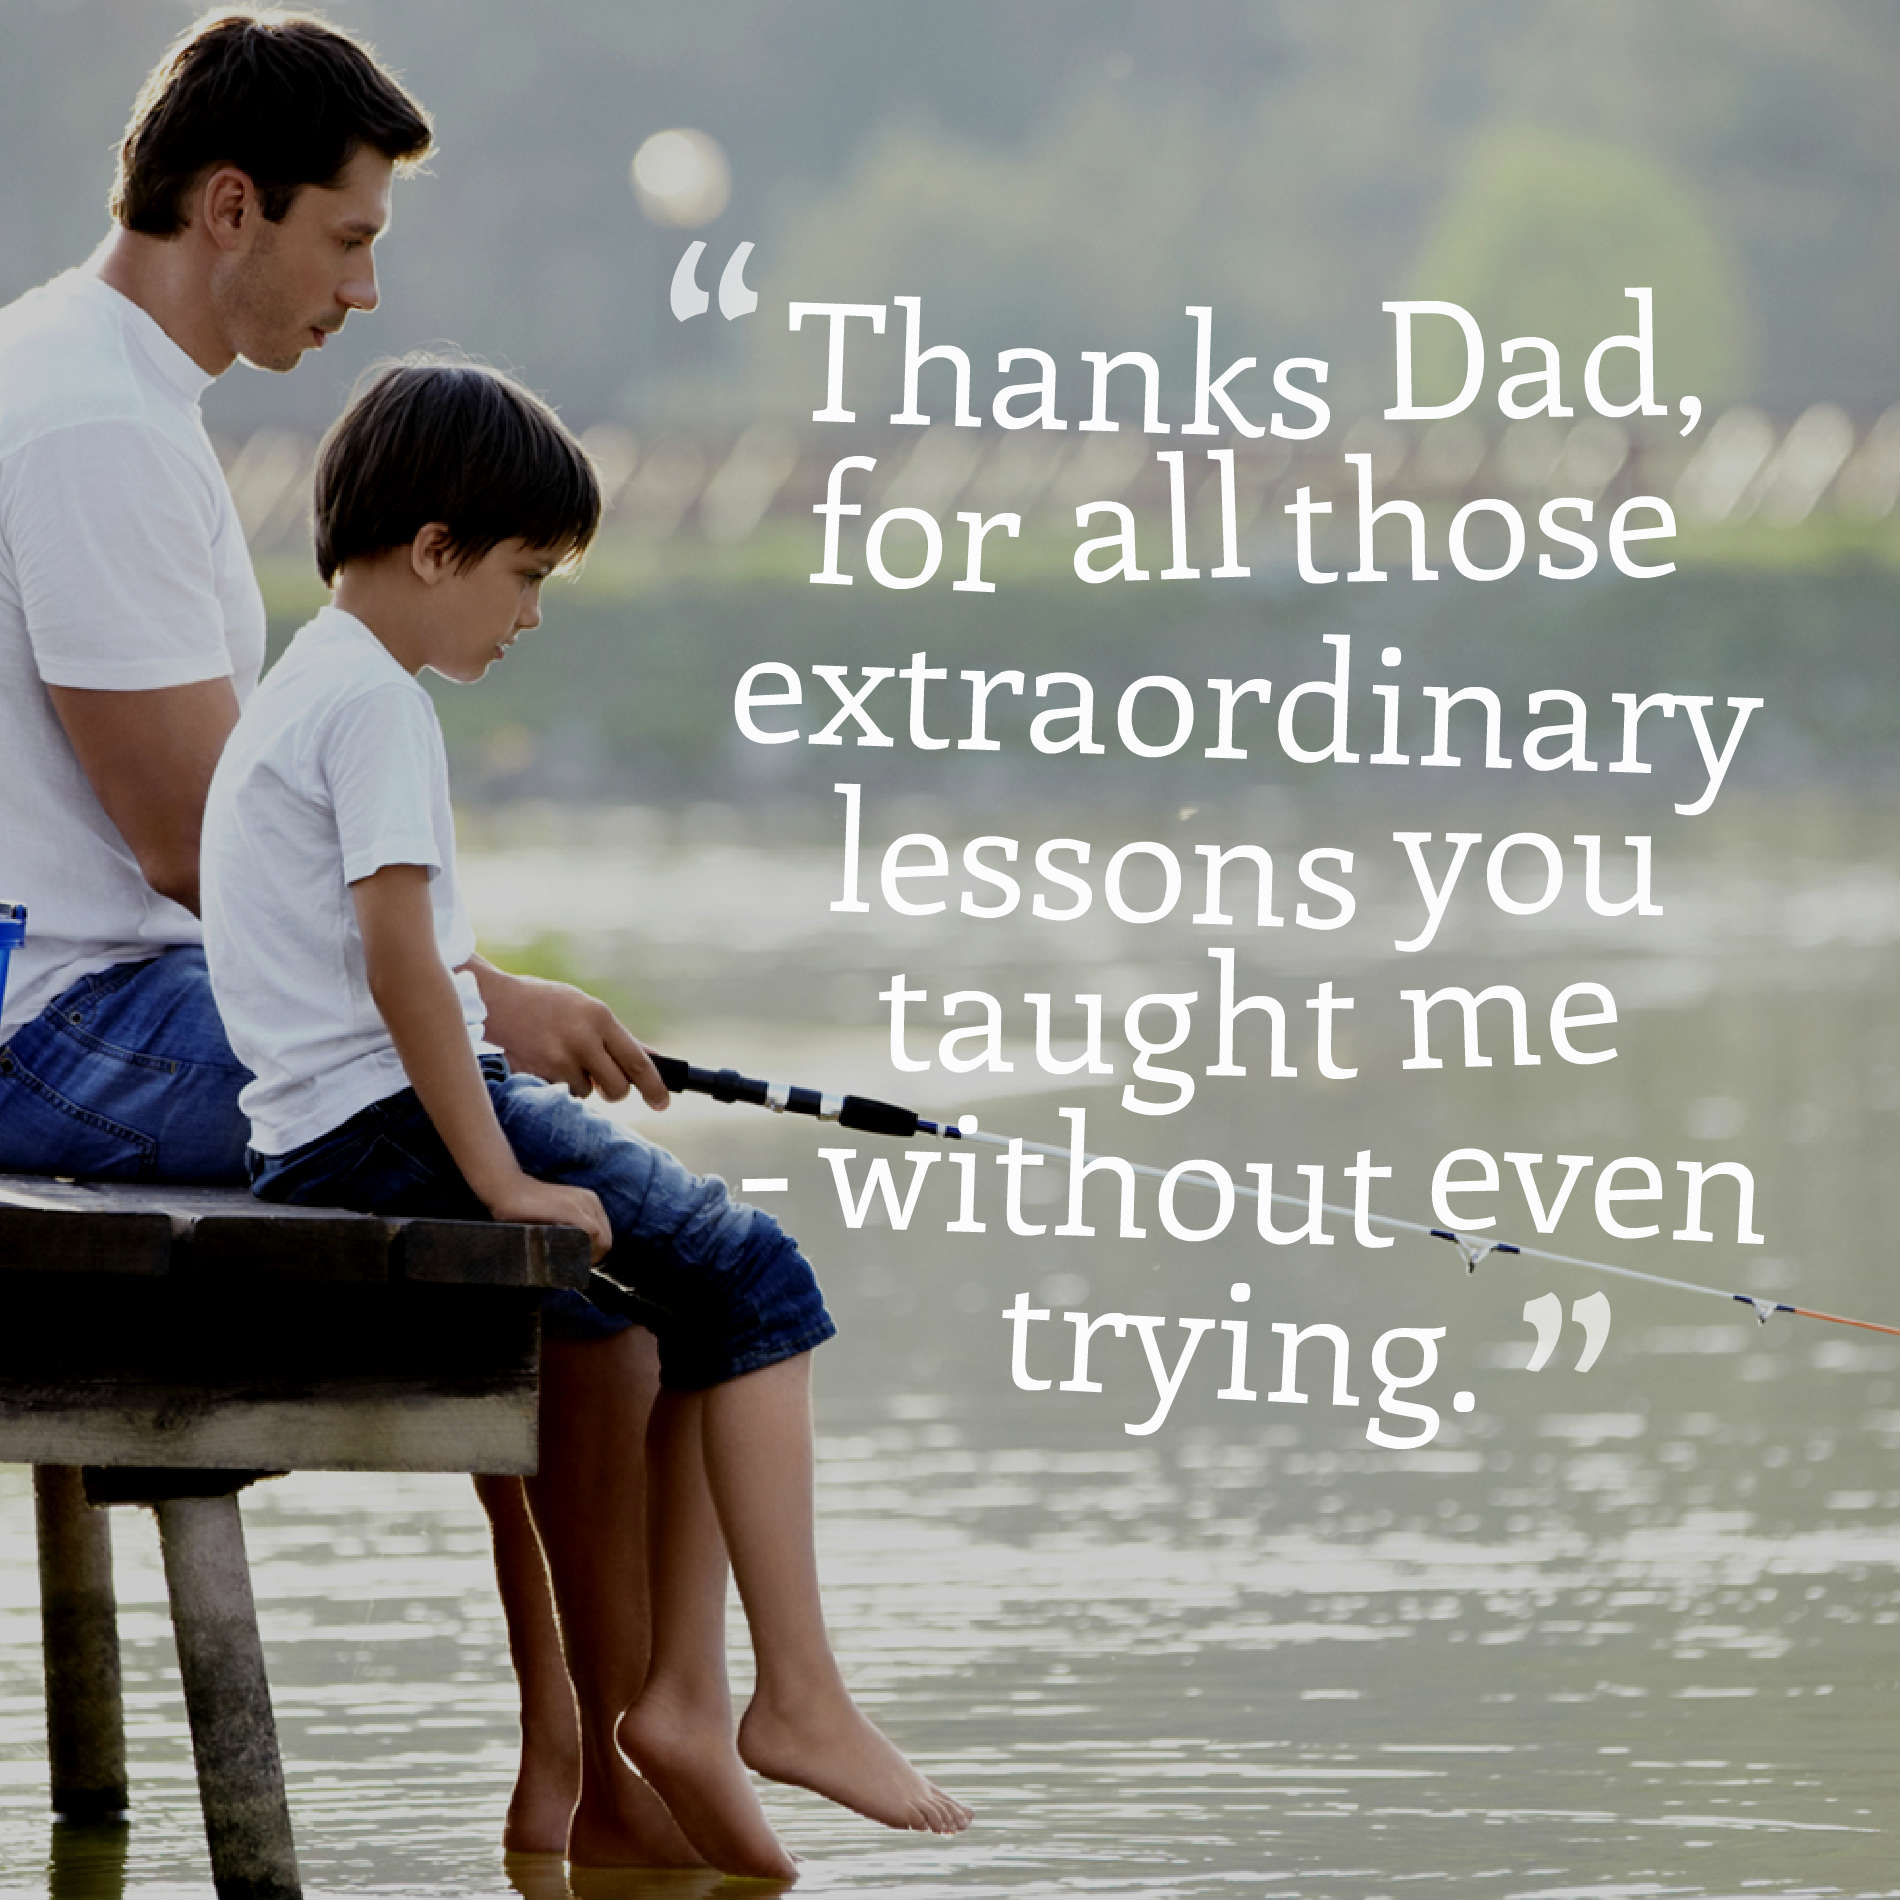 Thanks Dad, for all those extraordinary lessons you taught me - without even trying.